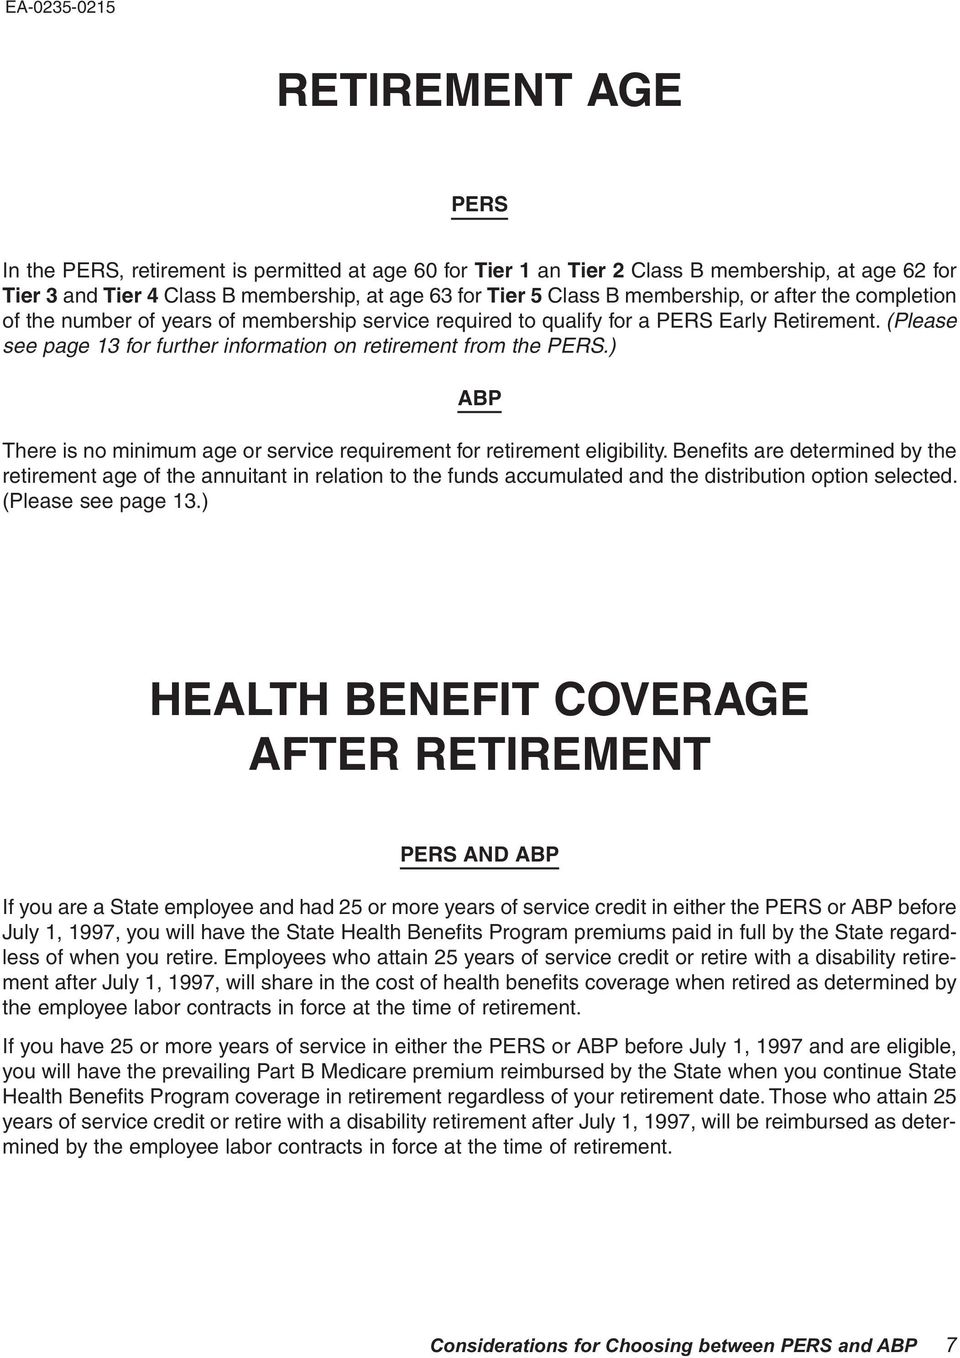 (Please see page 13 for further information on retirement from the PERS.) There is no minimum age or service requirement for retirement eligibility.